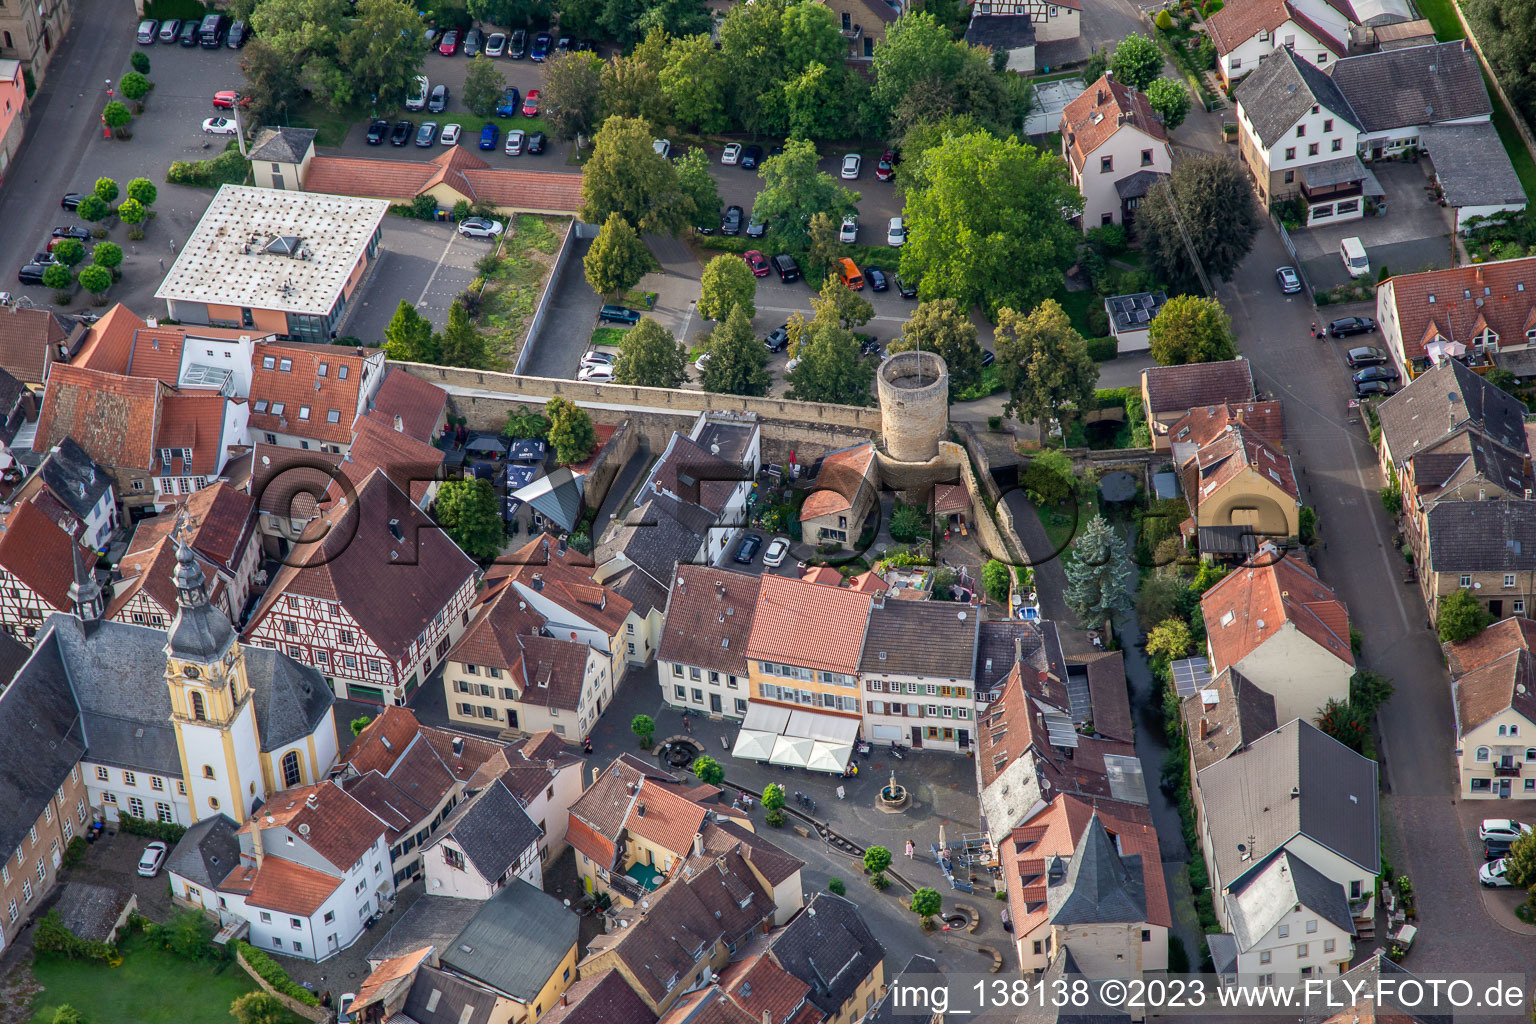 Reporting area on the old city wall with debt tower and citizen's tower in Meisenheim in the state Rhineland-Palatinate, Germany